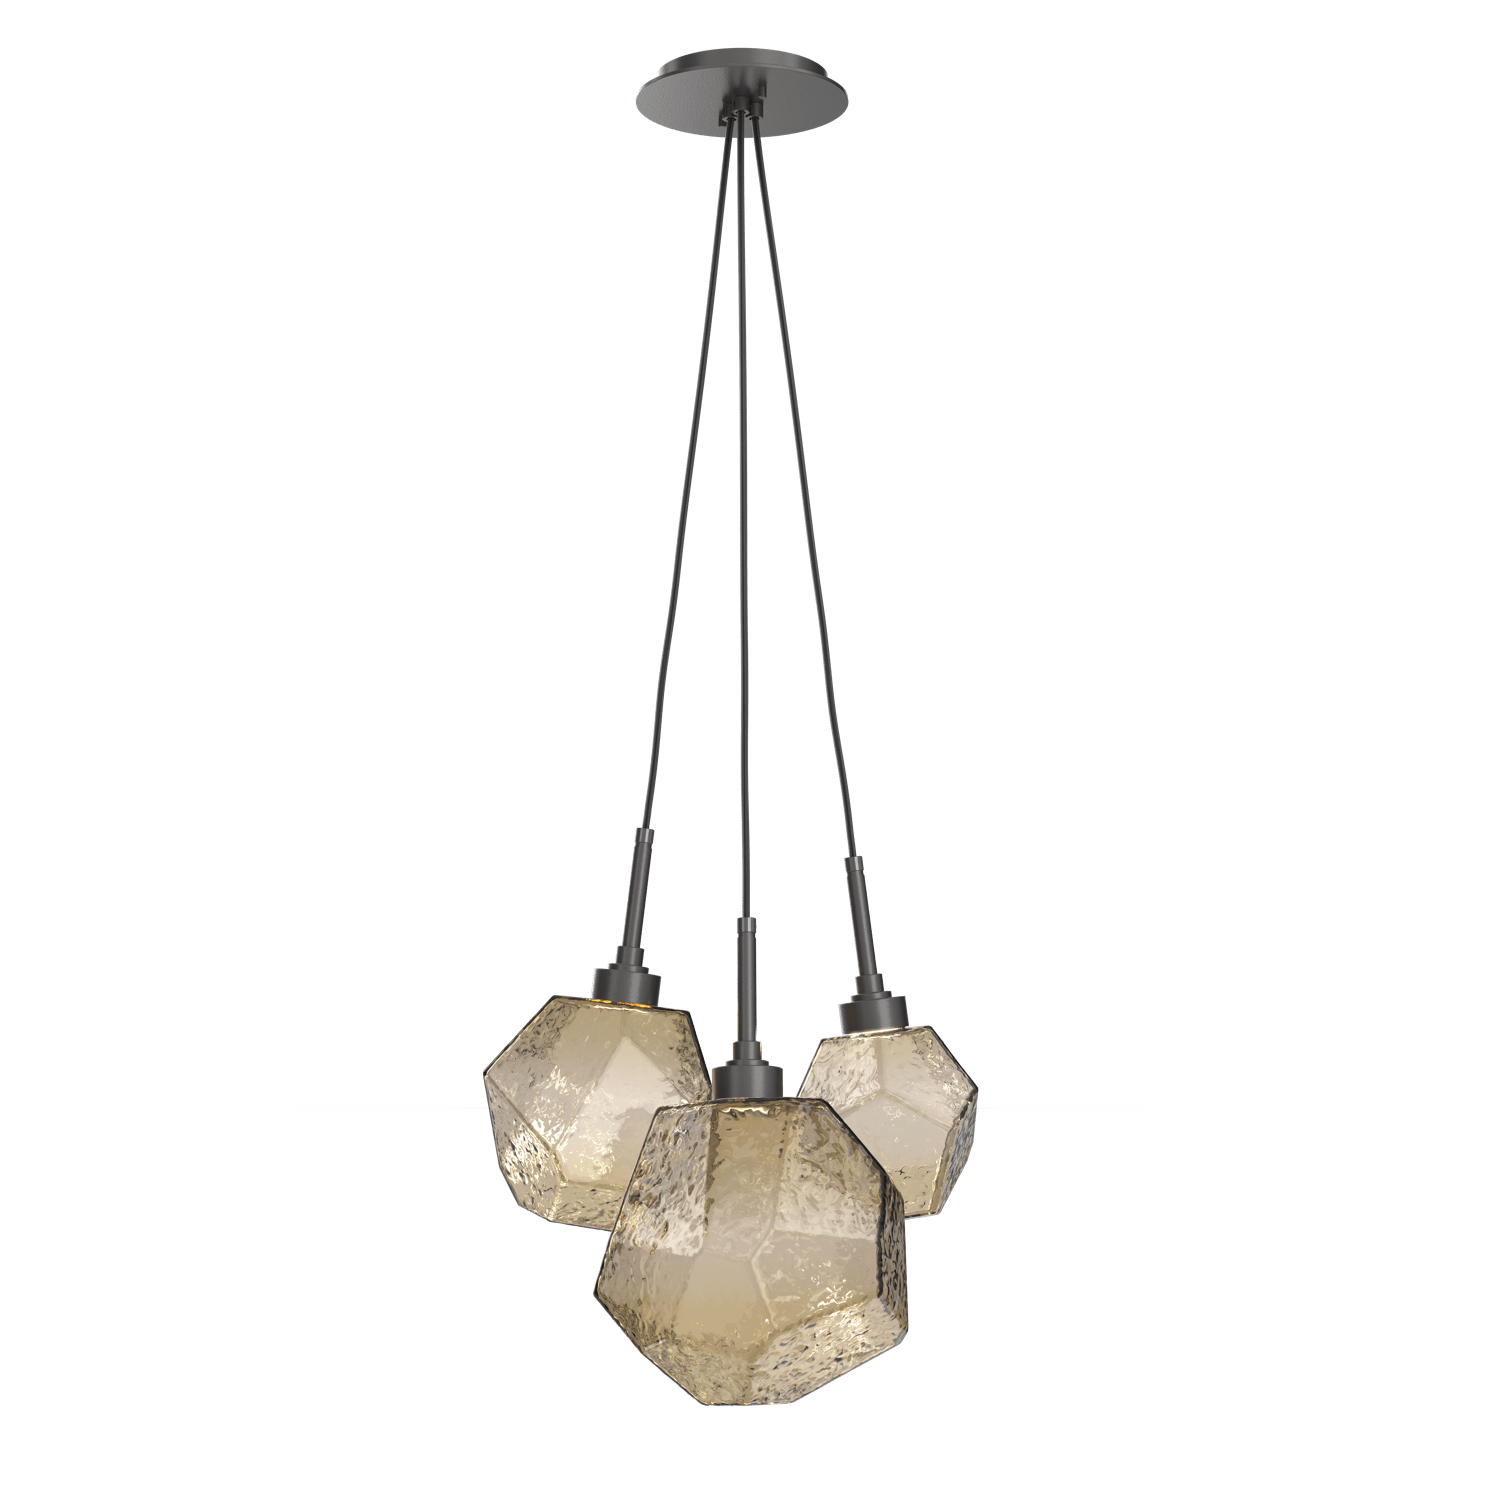 CHB0039-0E-GP-B-Hammerton-Studio-Gem-3-light-cluster-pendant-light-with-graphite-finish-and-bronze-blown-glass-shades-and-LED-lamping